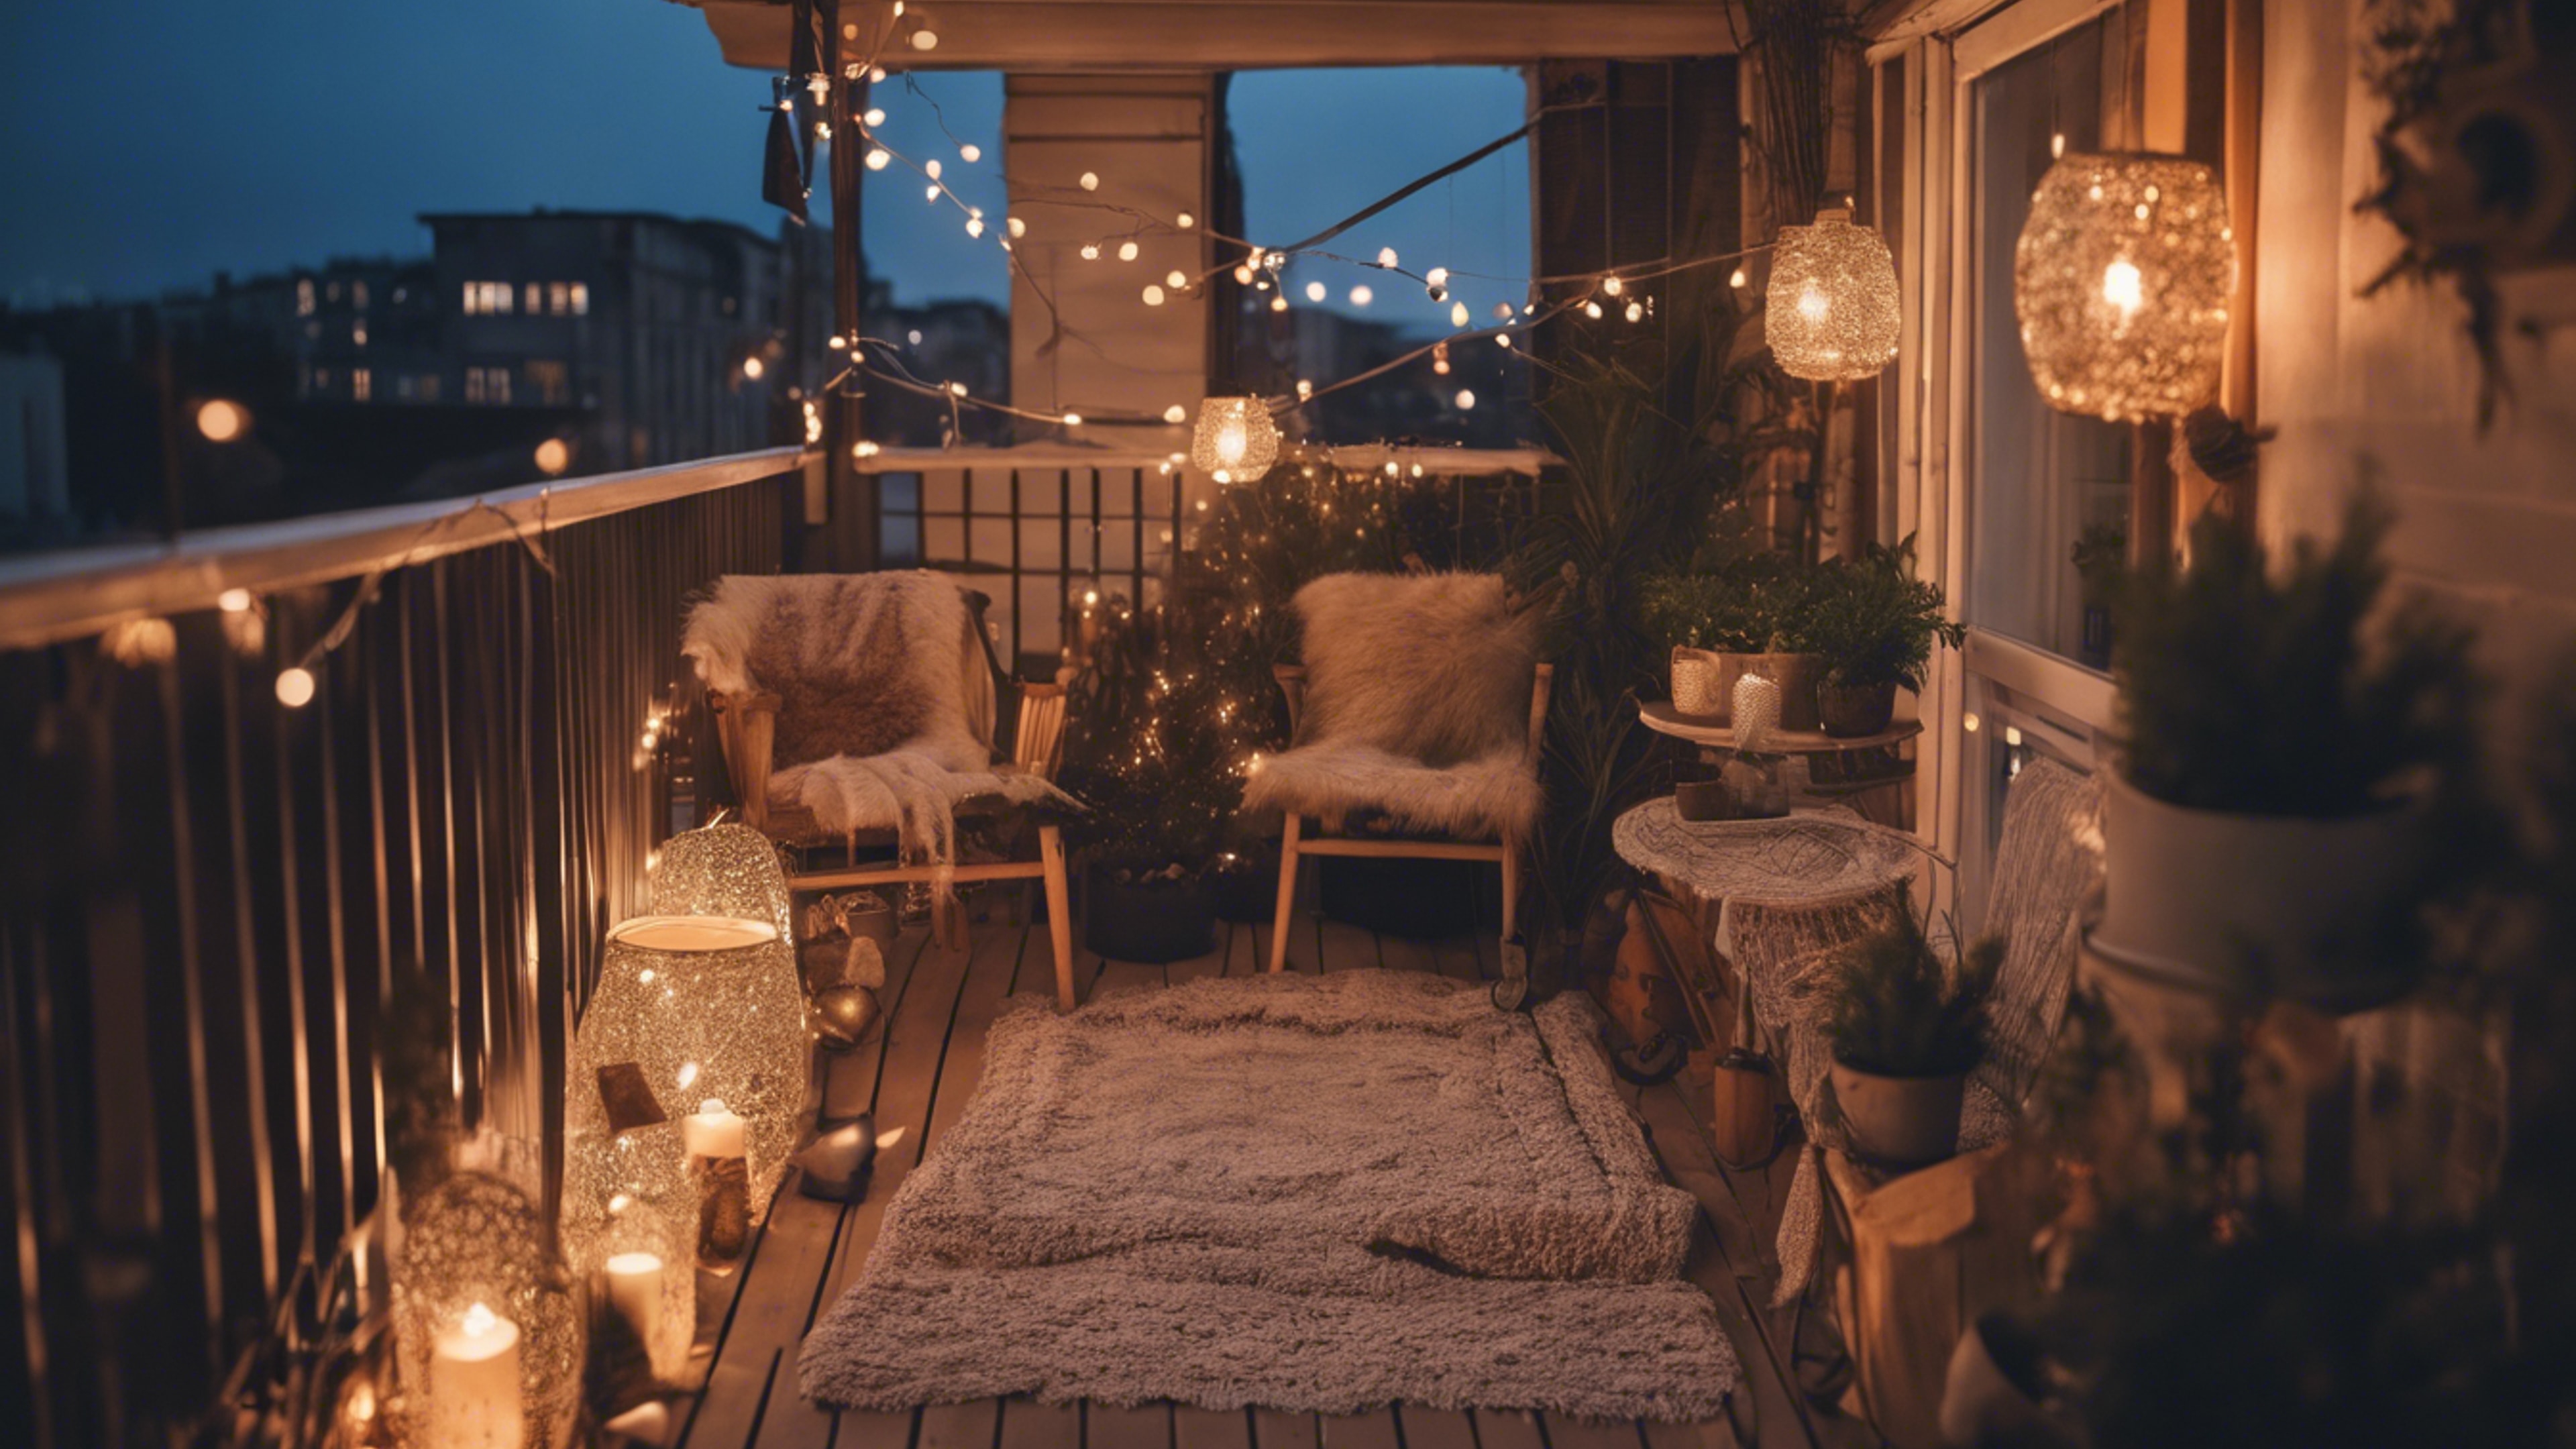 A boho apartment balcony decked out in twinkling Christmas lights and vintage lanterns. Wallpaper[78ab0d09d94642999e1c]